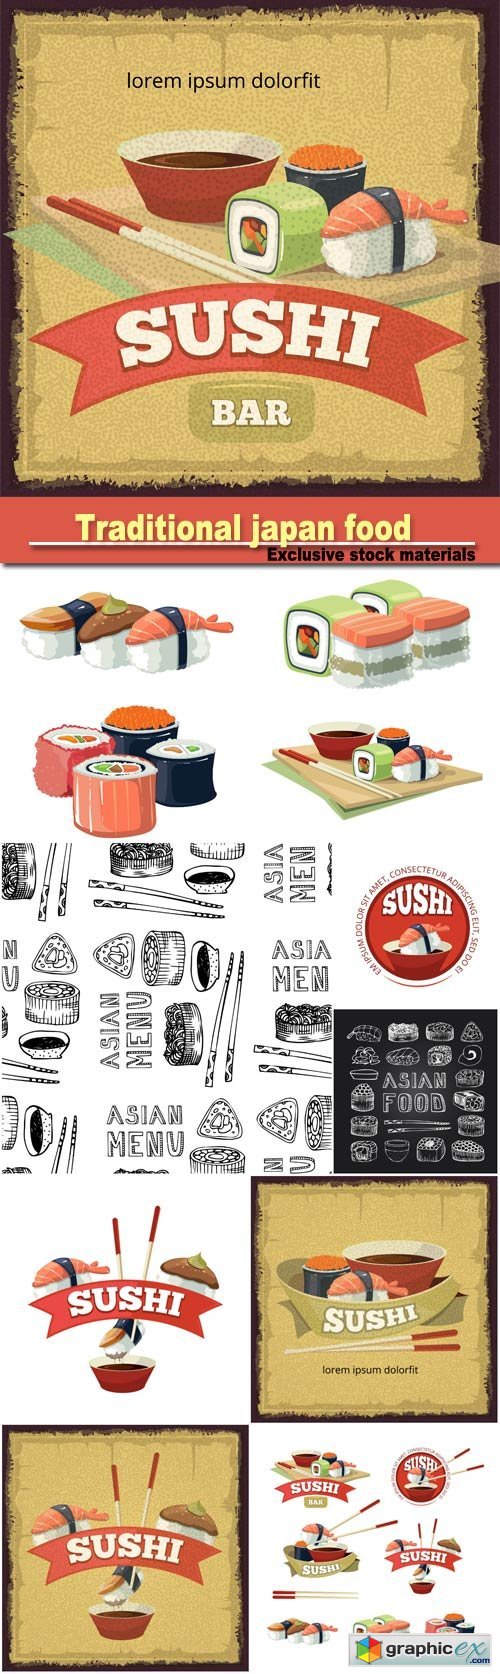 vintage poster with emblem of sushi banners, traditional japan food